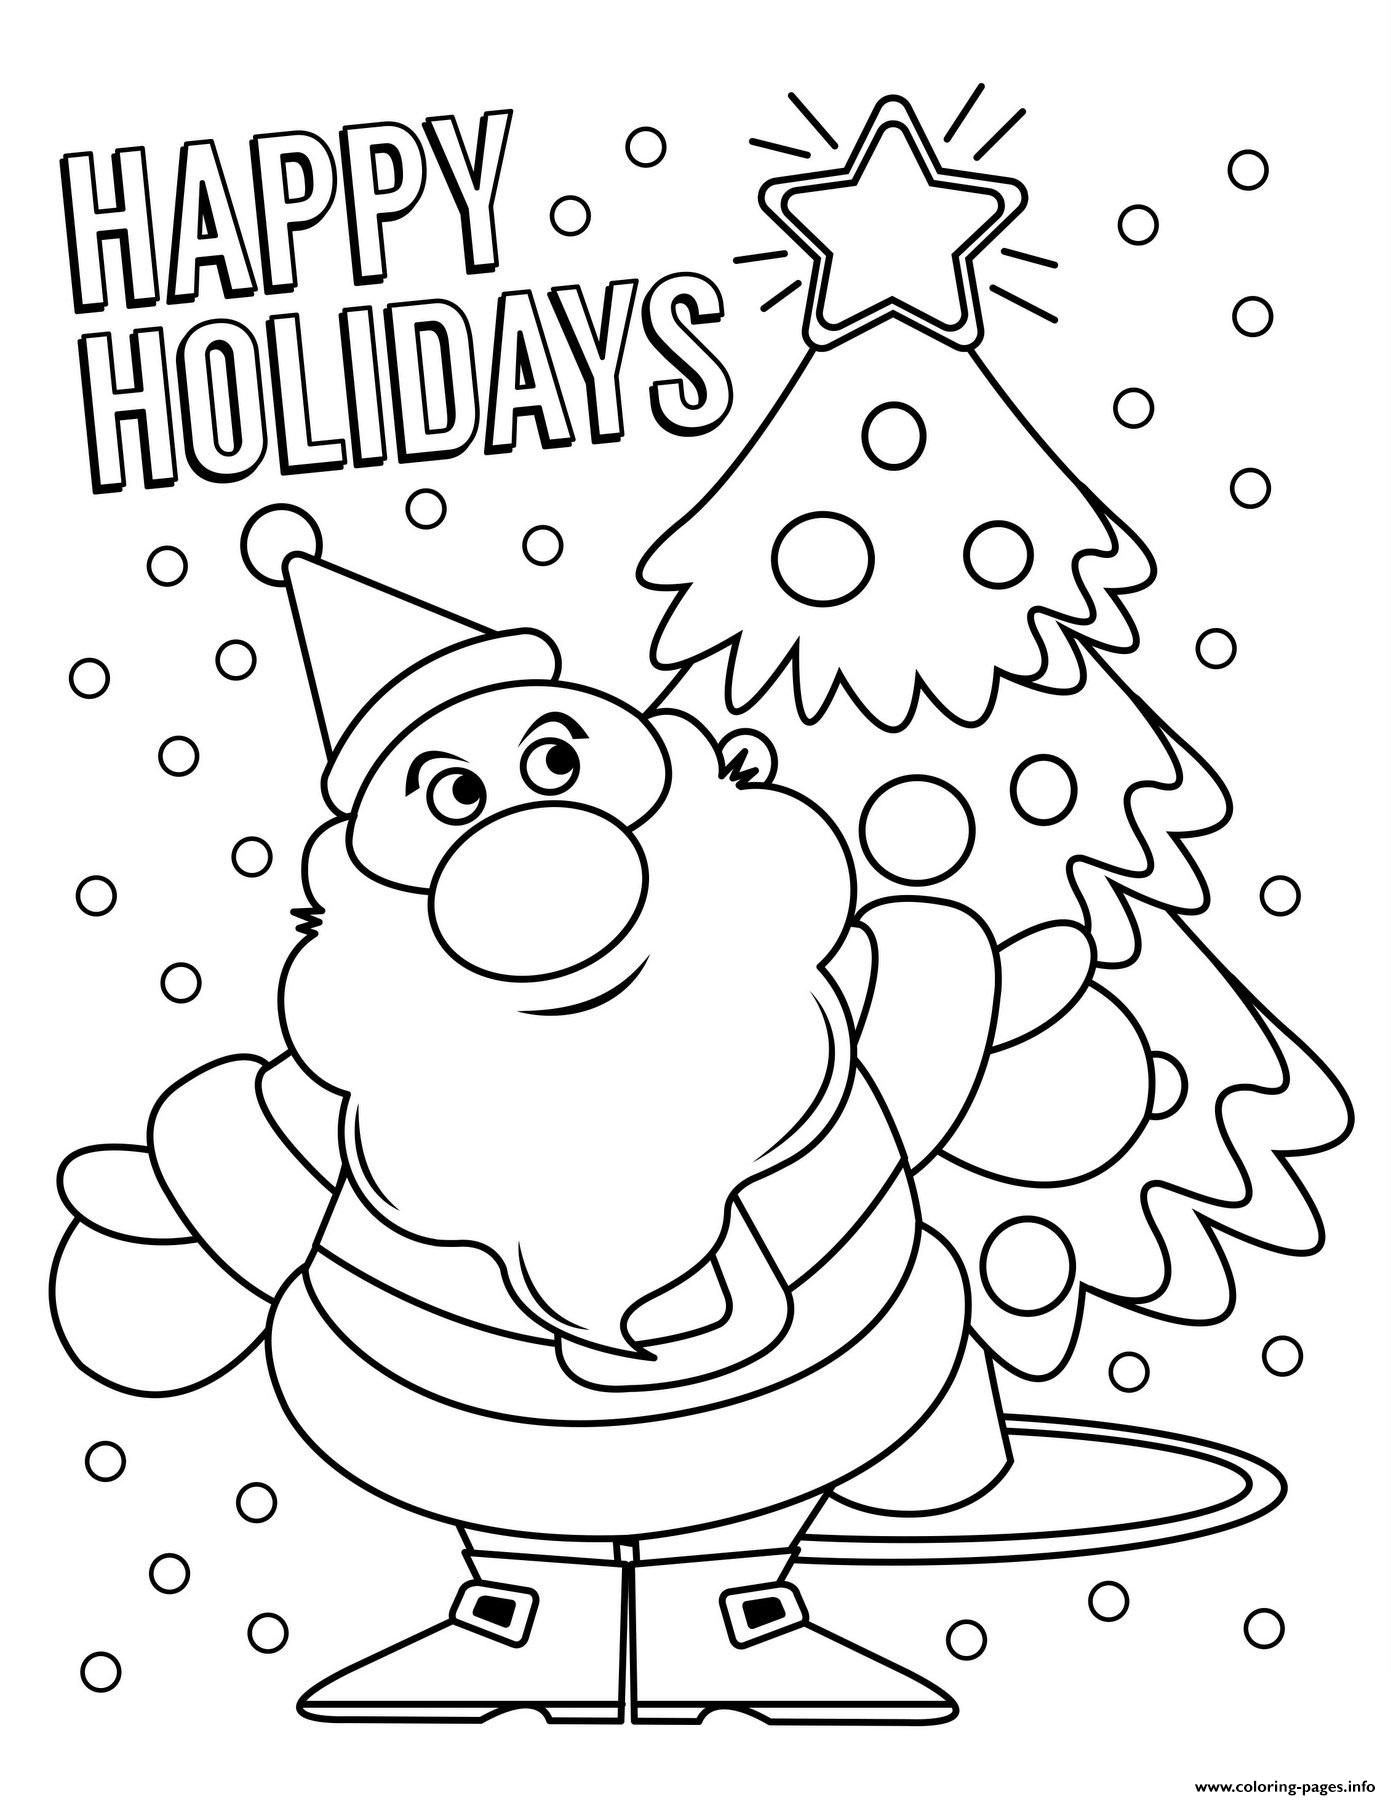 free-printable-coloring-pages-holidays-printable-word-searches